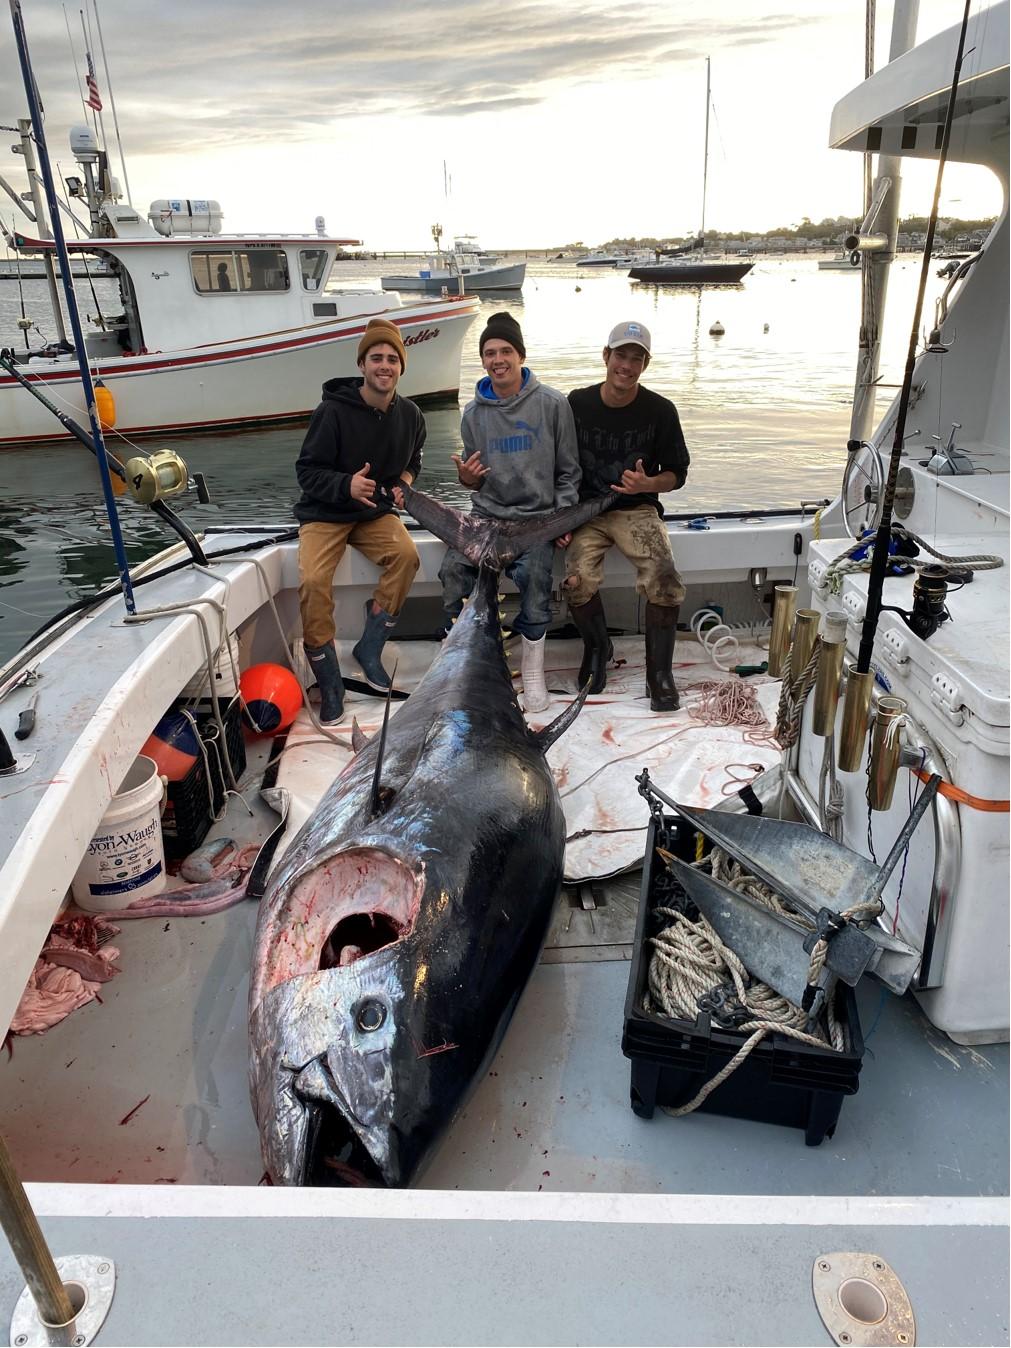 Dan Smith, Kyle Falle, and Jim McCormack with their catch. (Courtesy of <a href="https://www.julianicolecharters.com/">Dan Smith Sr.</a>)